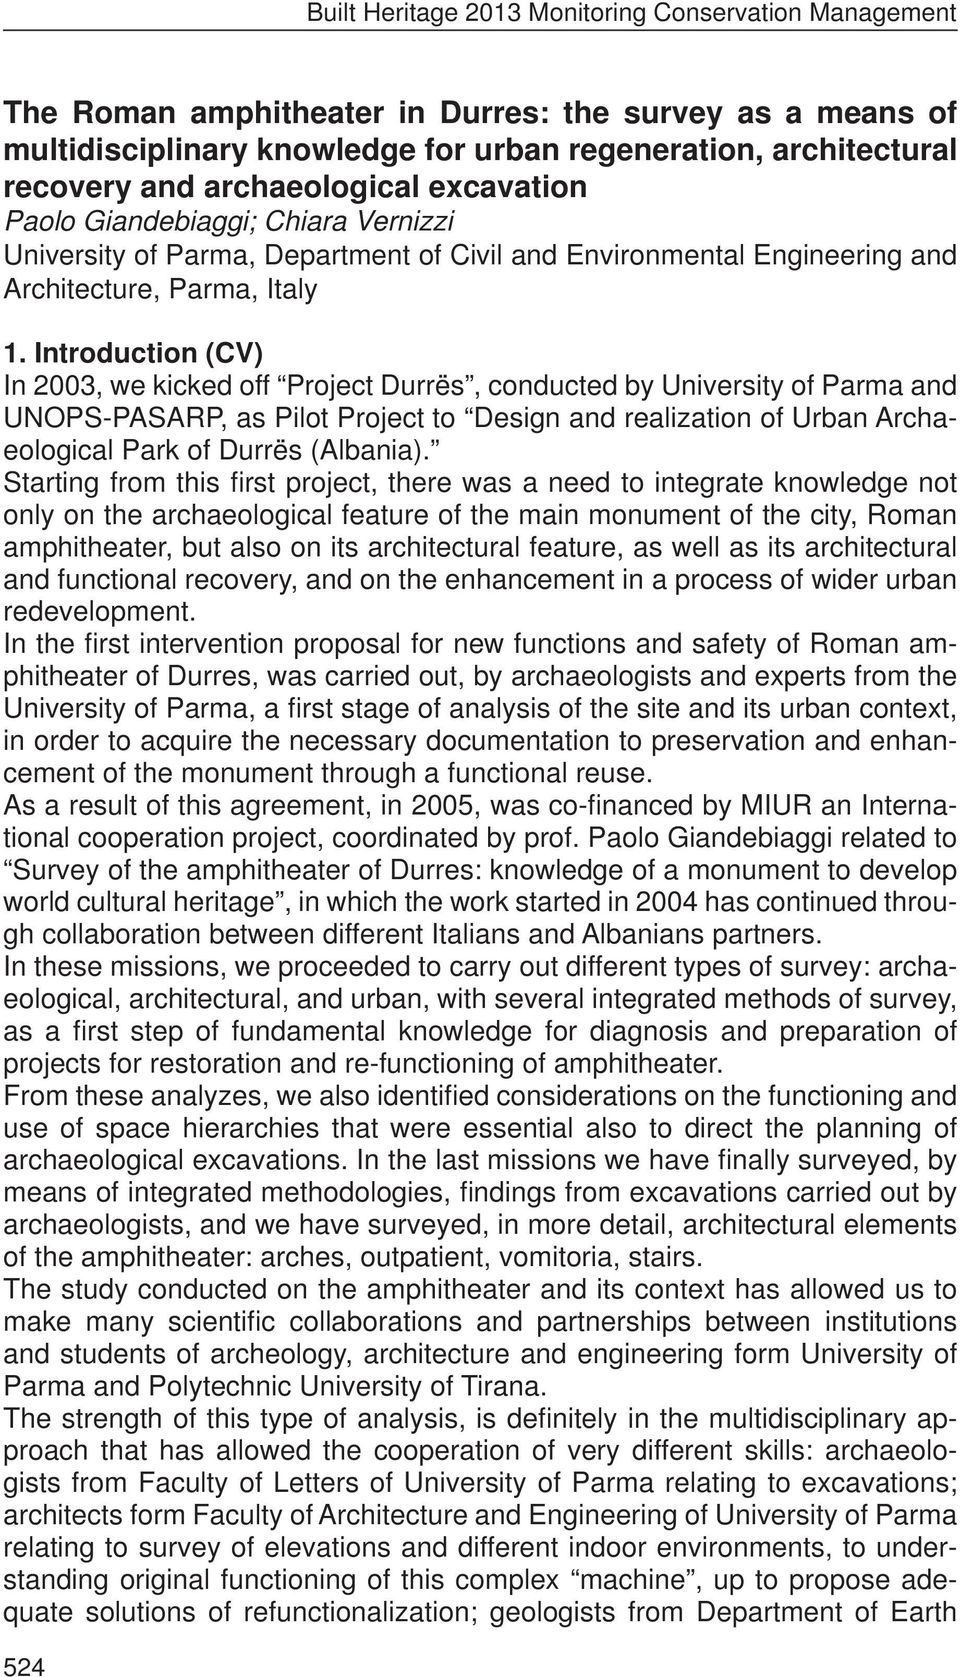 Introduction (CV) In 2003, we kicked off Project Durrës, conducted by University of Parma and UNOPS-PASARP, as Pilot Project to Design and realization of Urban Archaeological Park of Durrës (Albania).